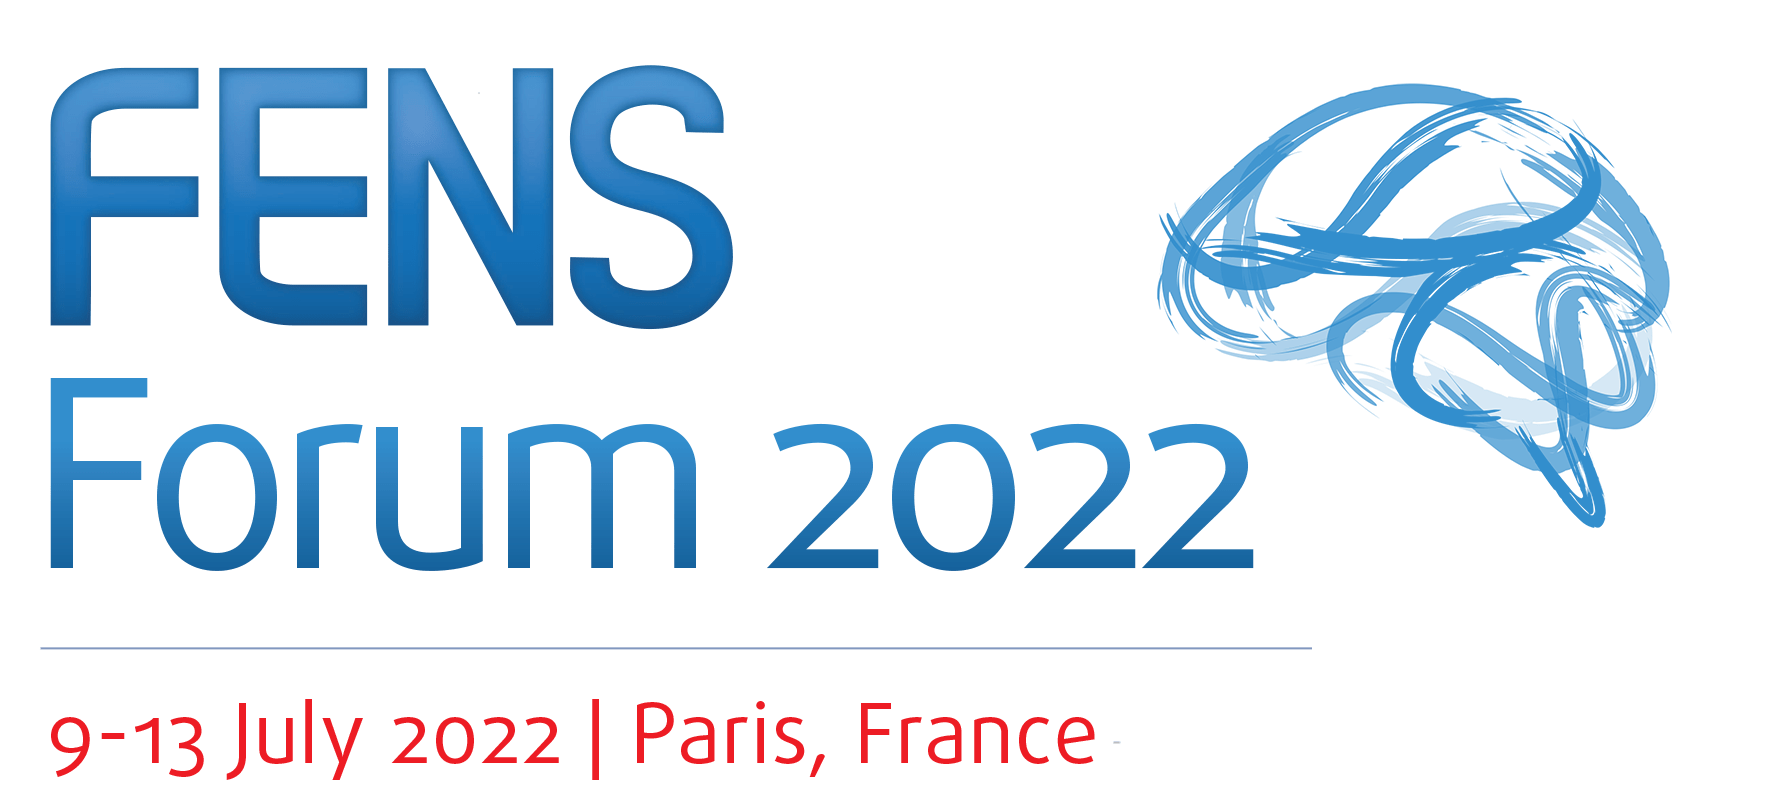 Food & Beverage at the Venue - FENS 2022 - International Neuroscience Conference